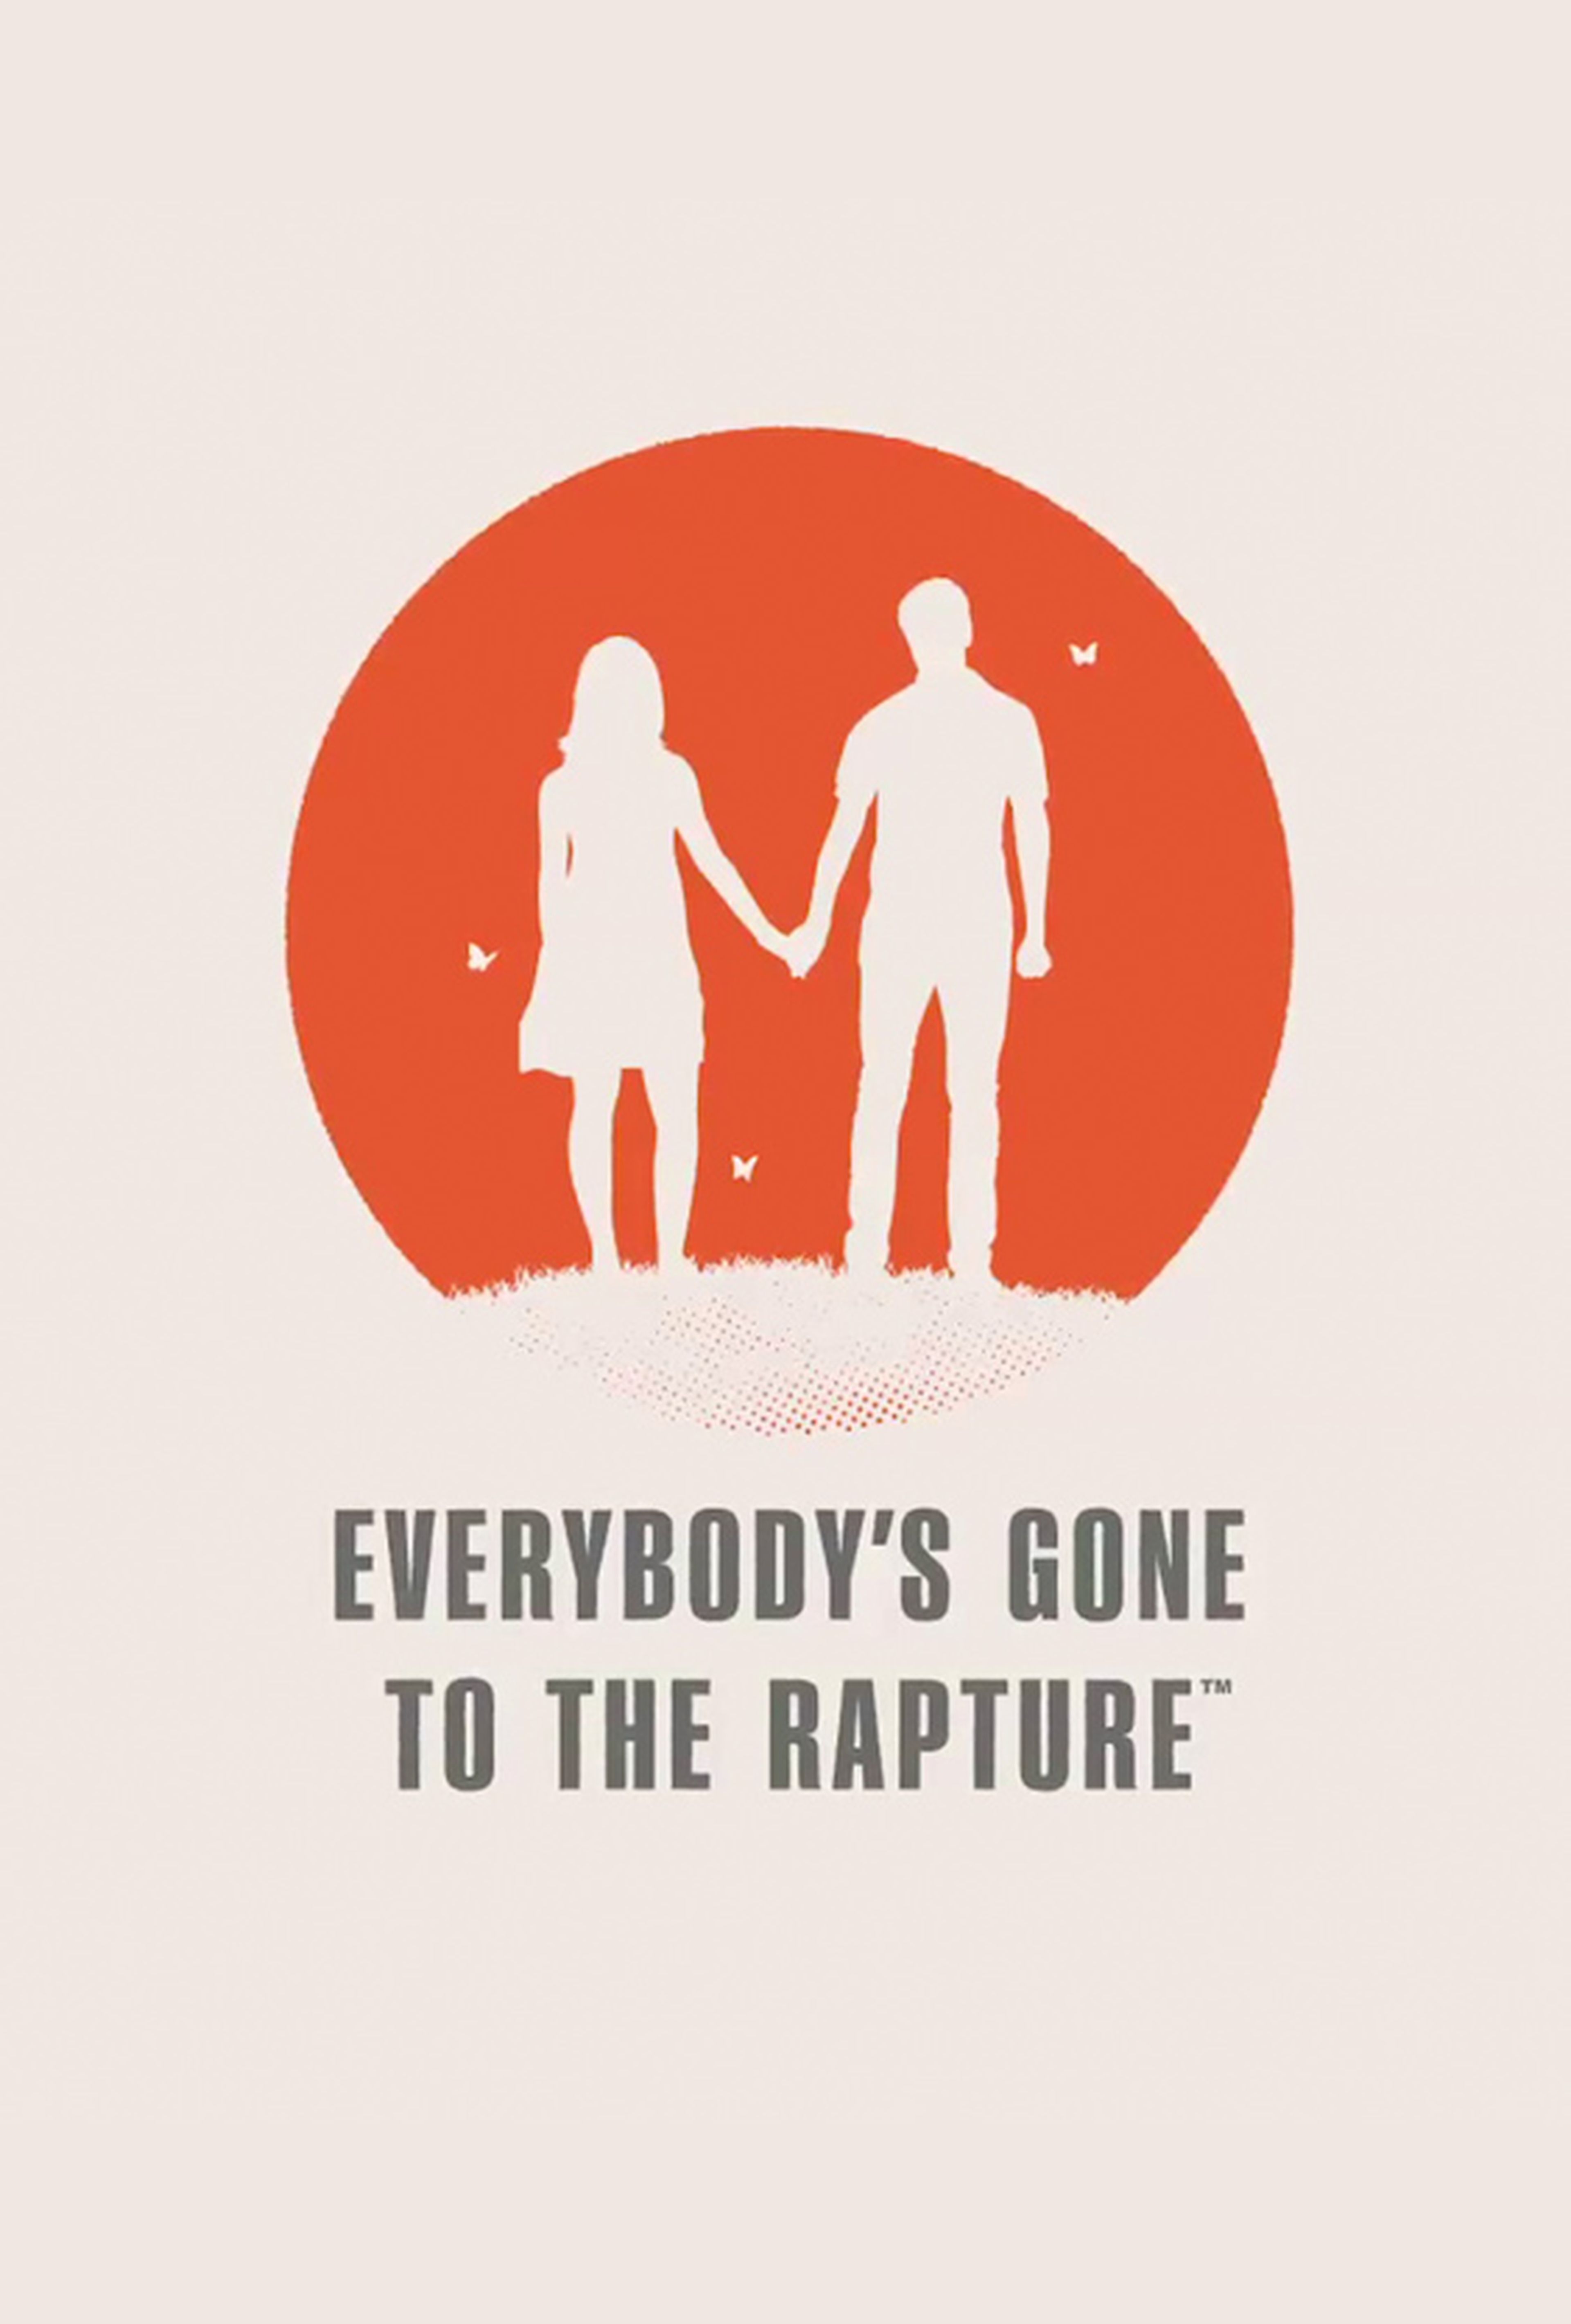 Caratula - Everybody's gone to the Rapture